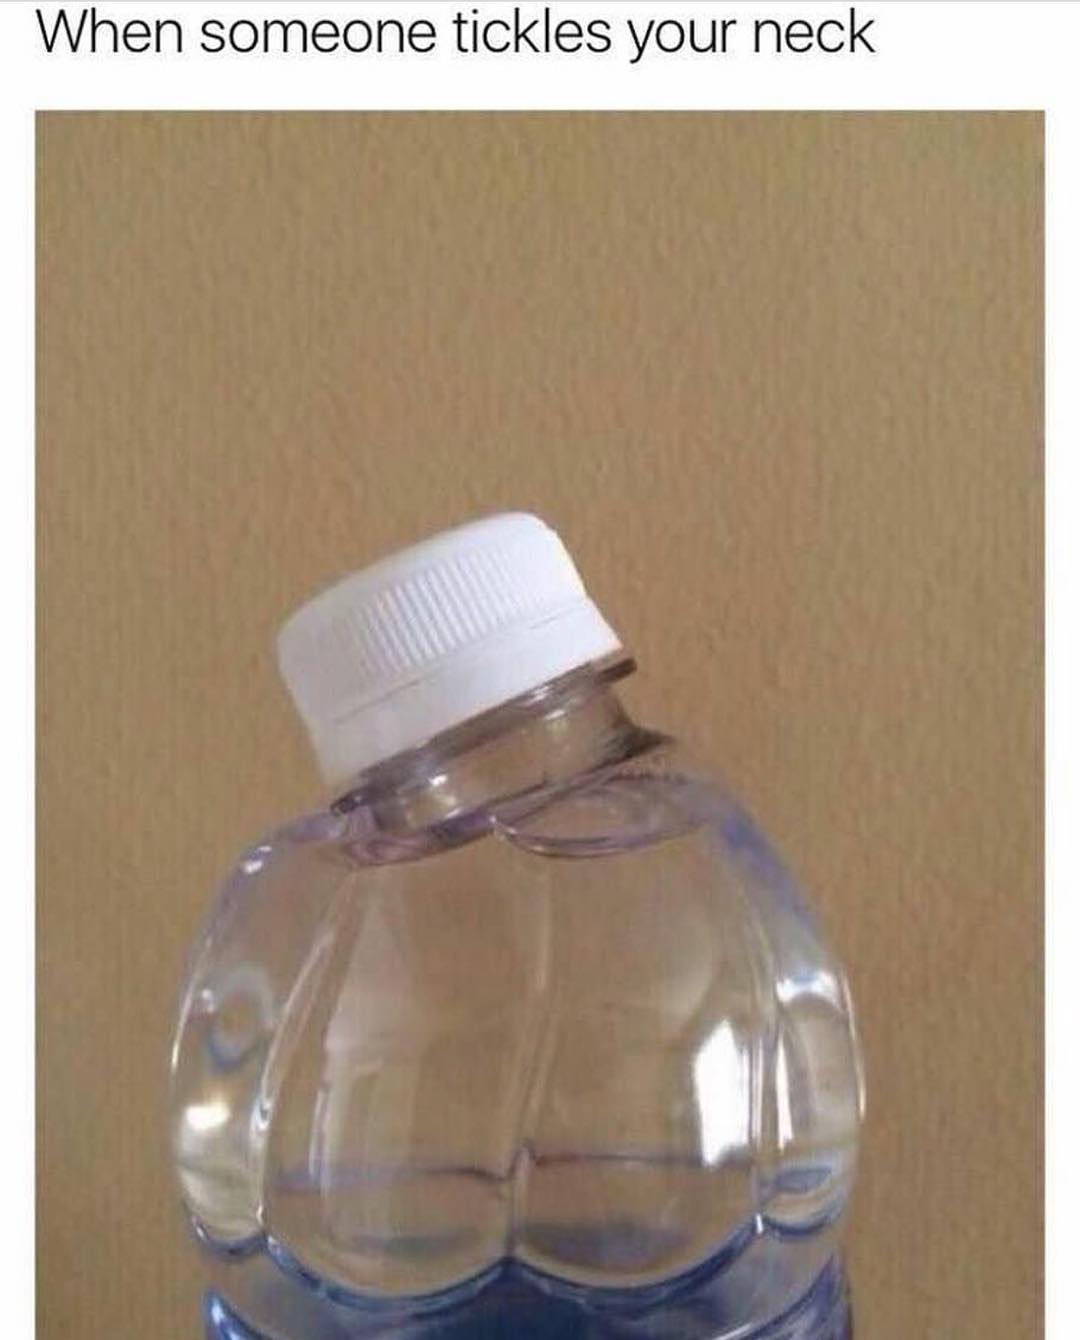 When someone tickles your neck.